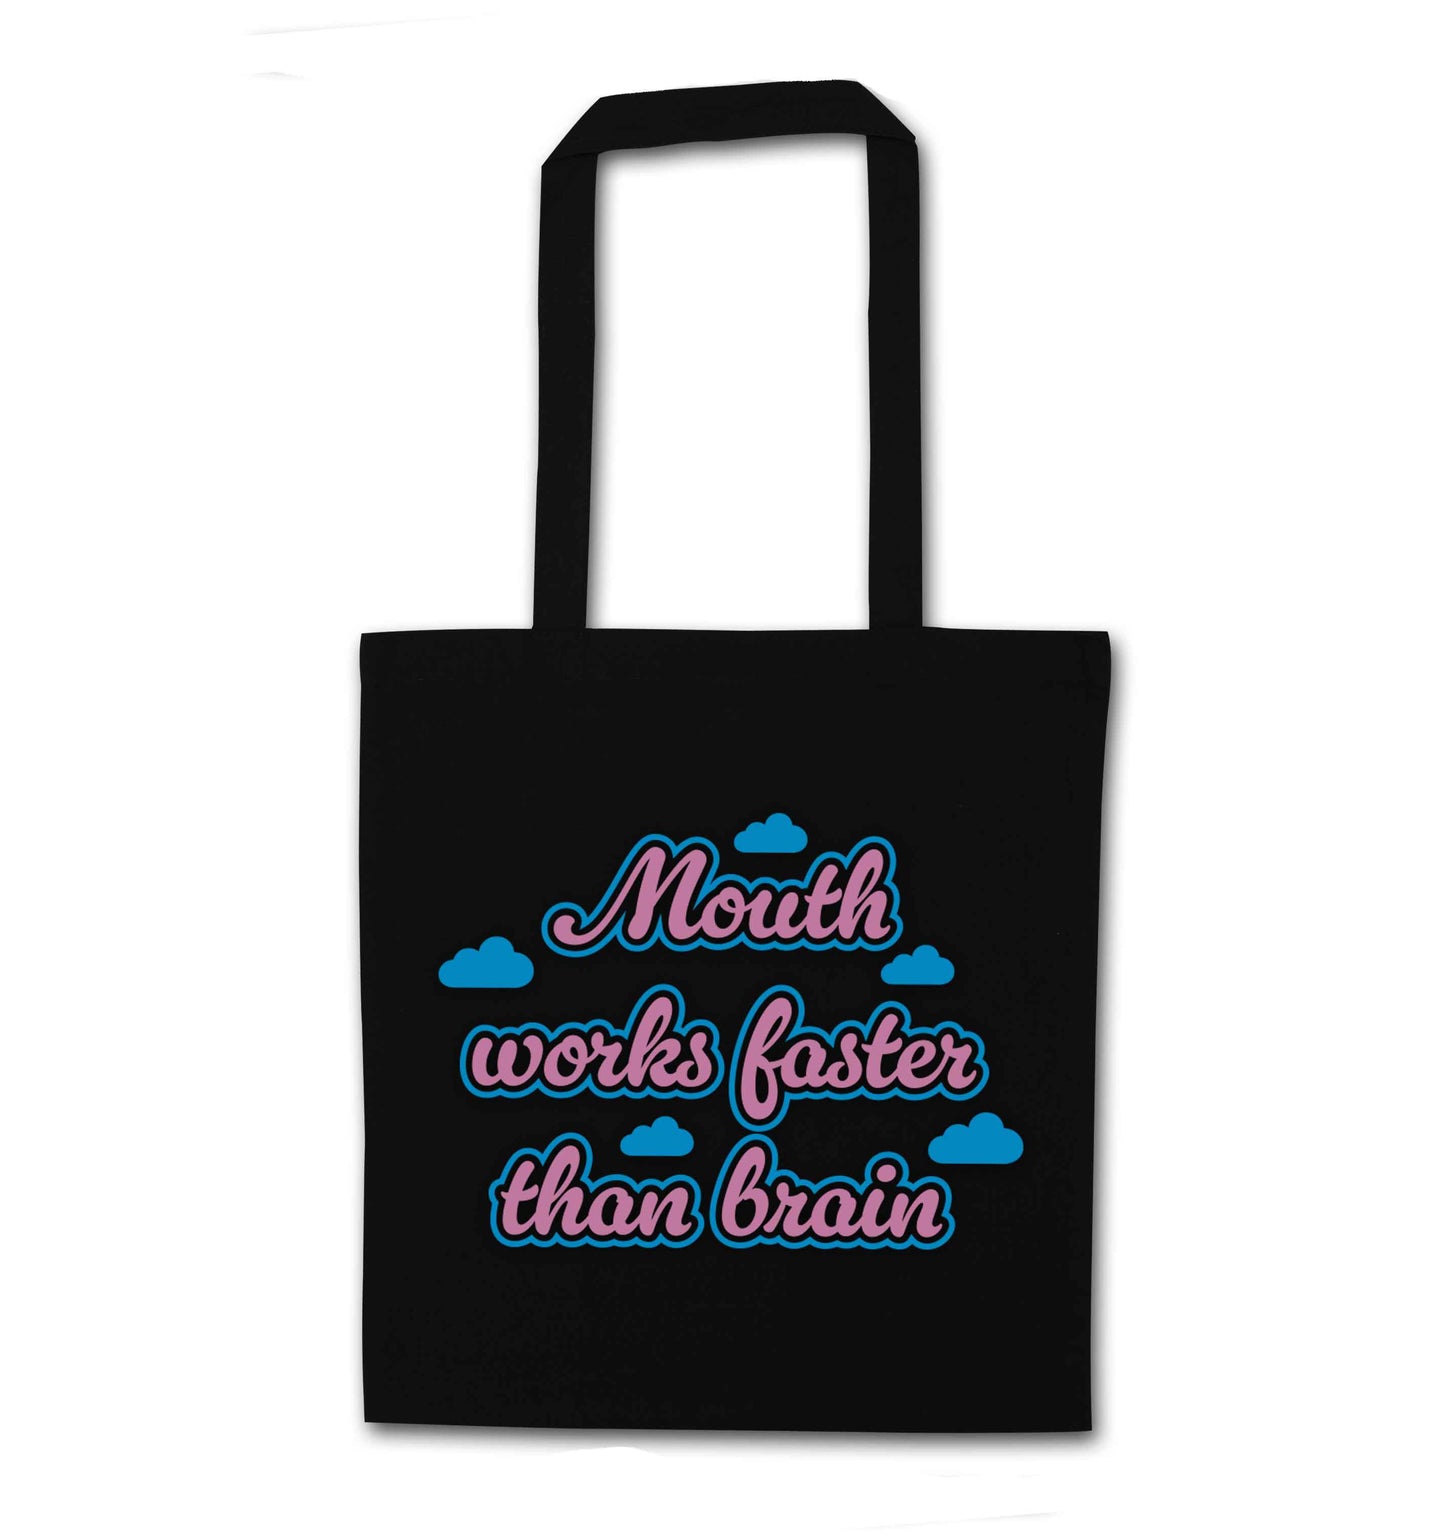 Mouth works faster than brain black tote bag